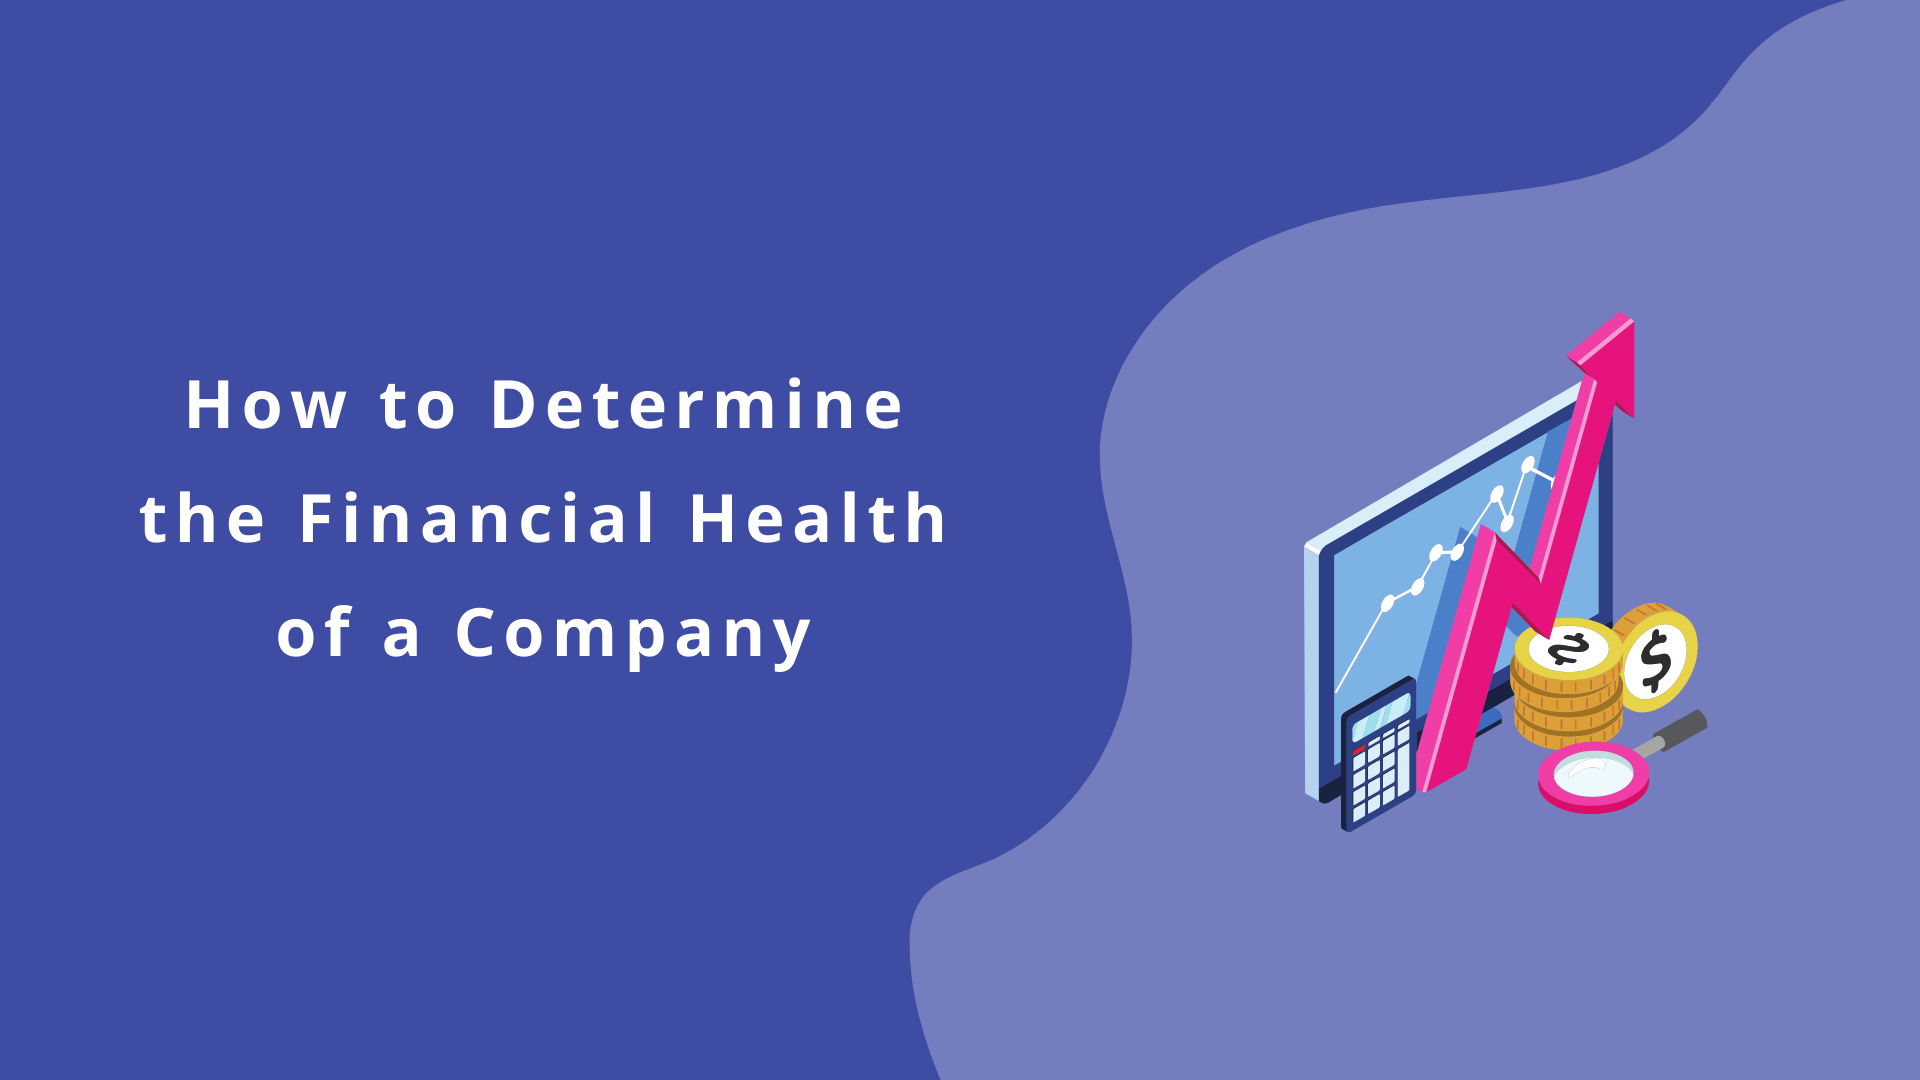 How to Determine the Financial Health of a Company